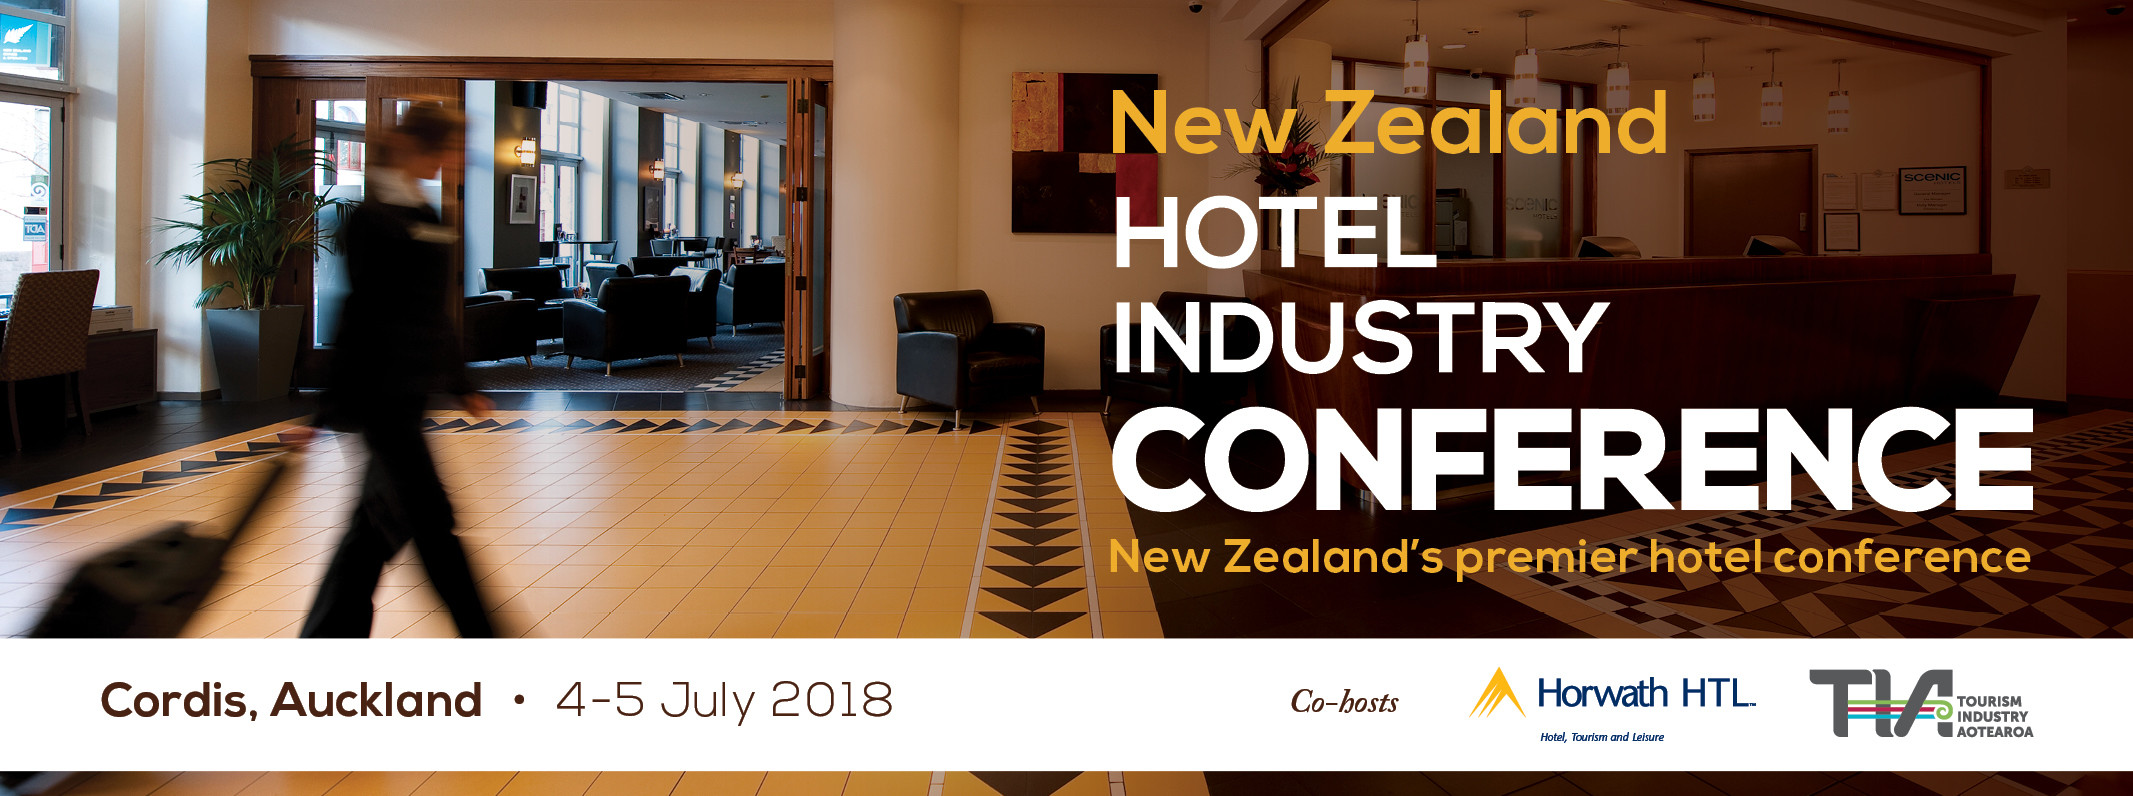 premier hardwood floors and contracting co llc of speakers nzhic 2018 throughout hotel web banner 2018 1024x382px v3 150dpi